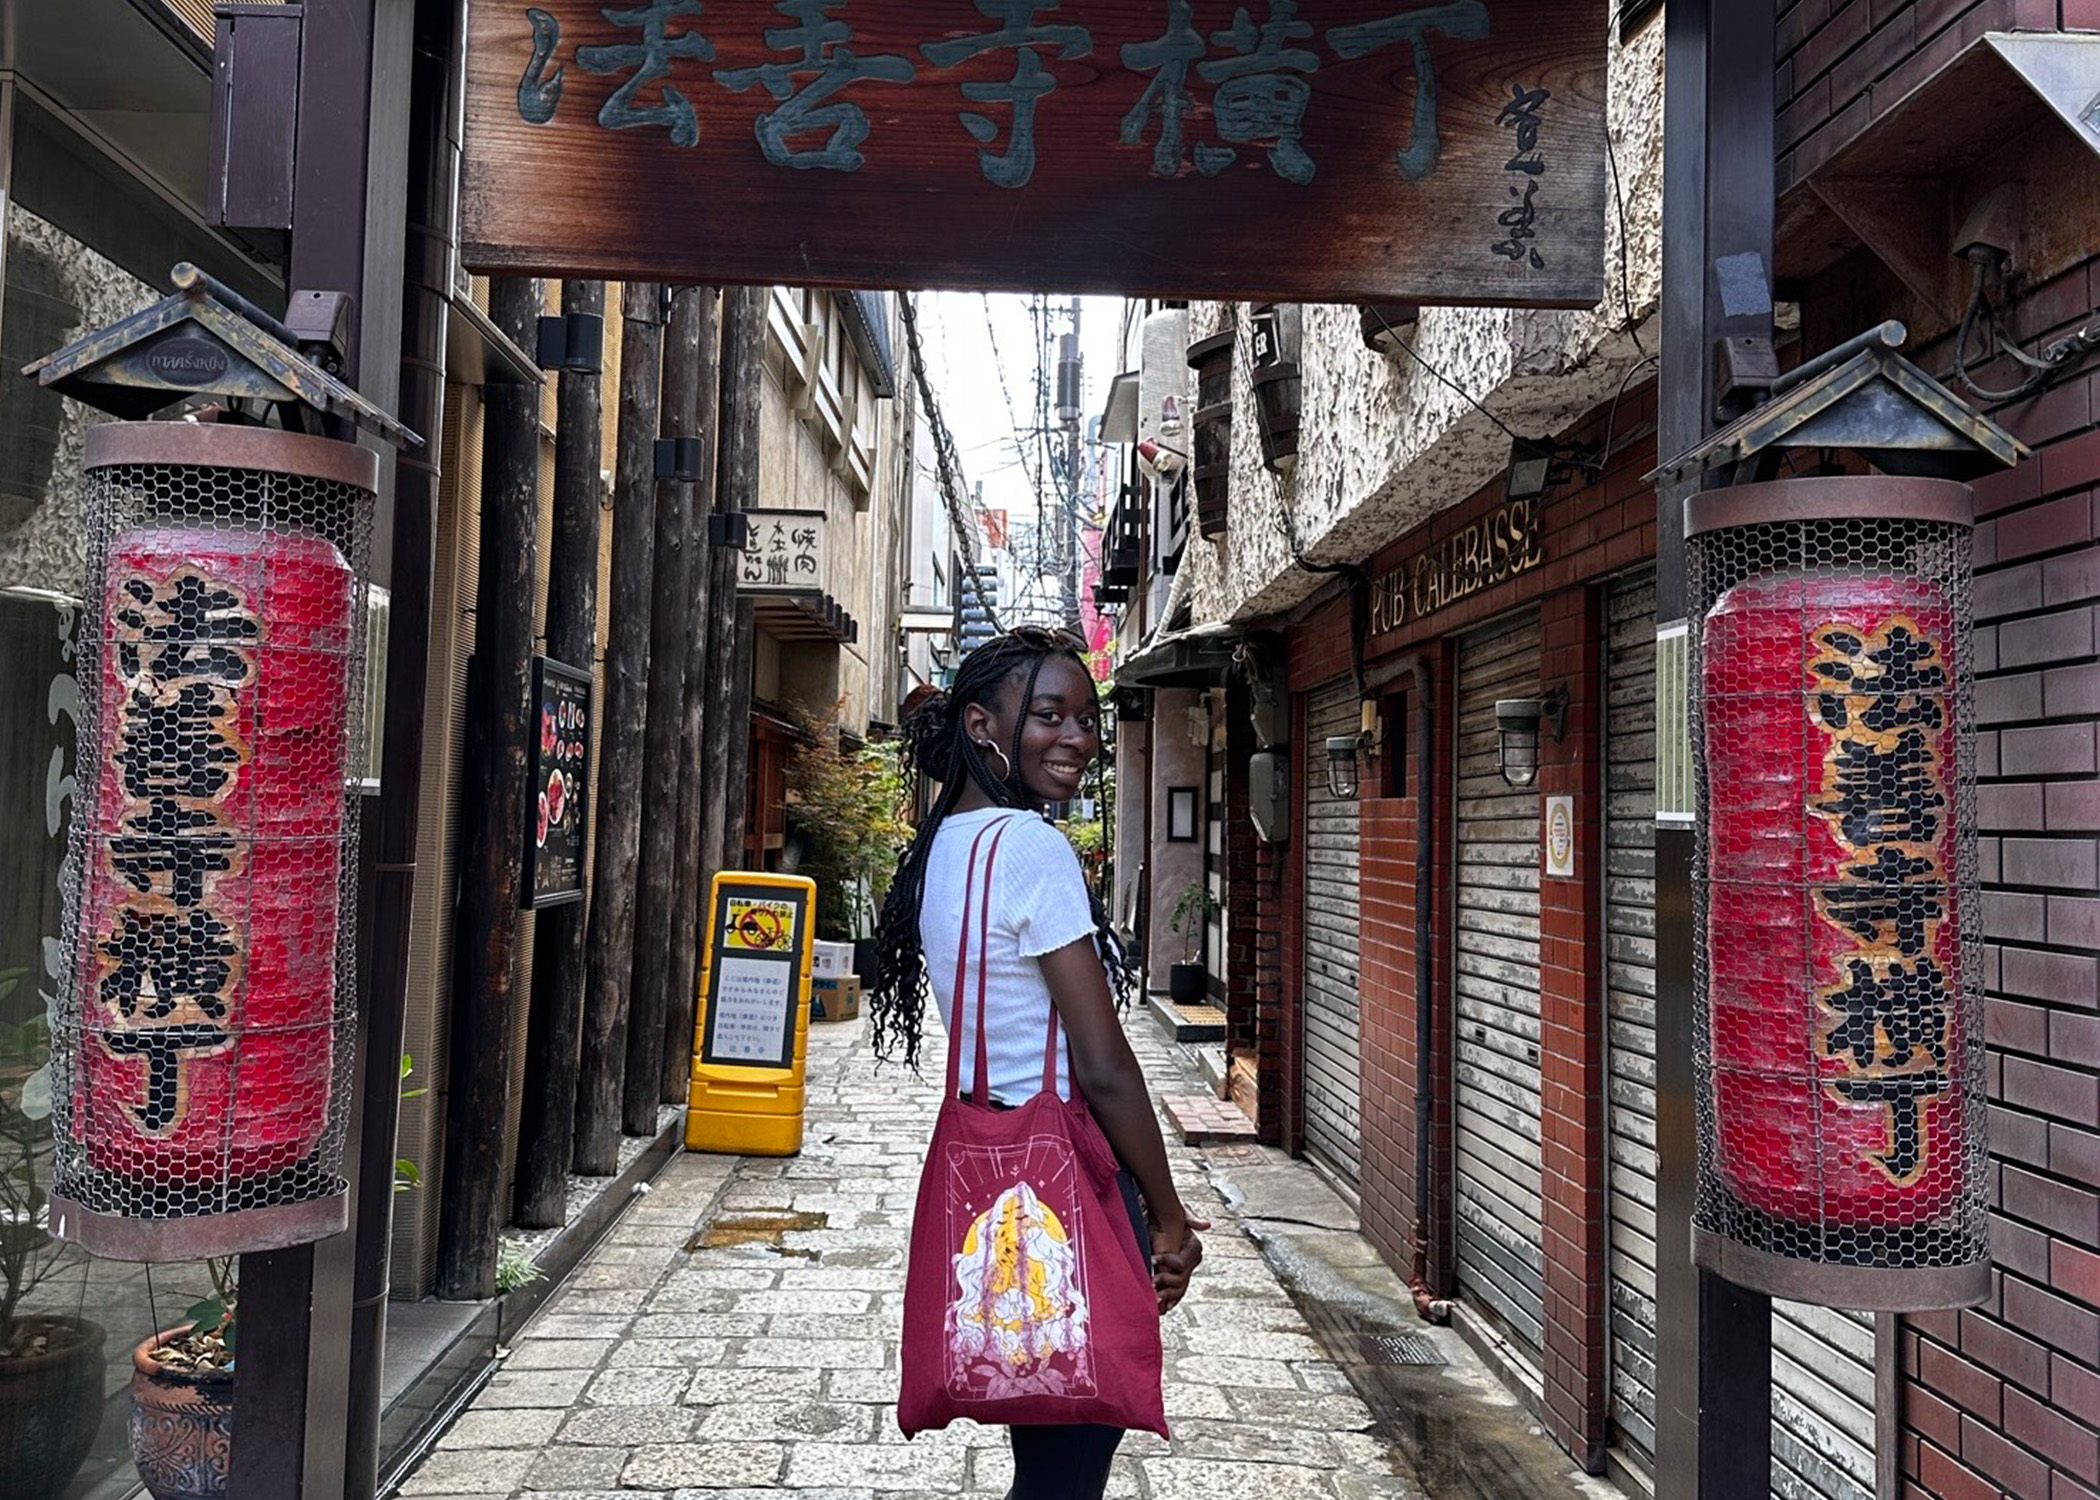 Young woman poses in a coblestone alley with Japanese signs and lanterns around her.